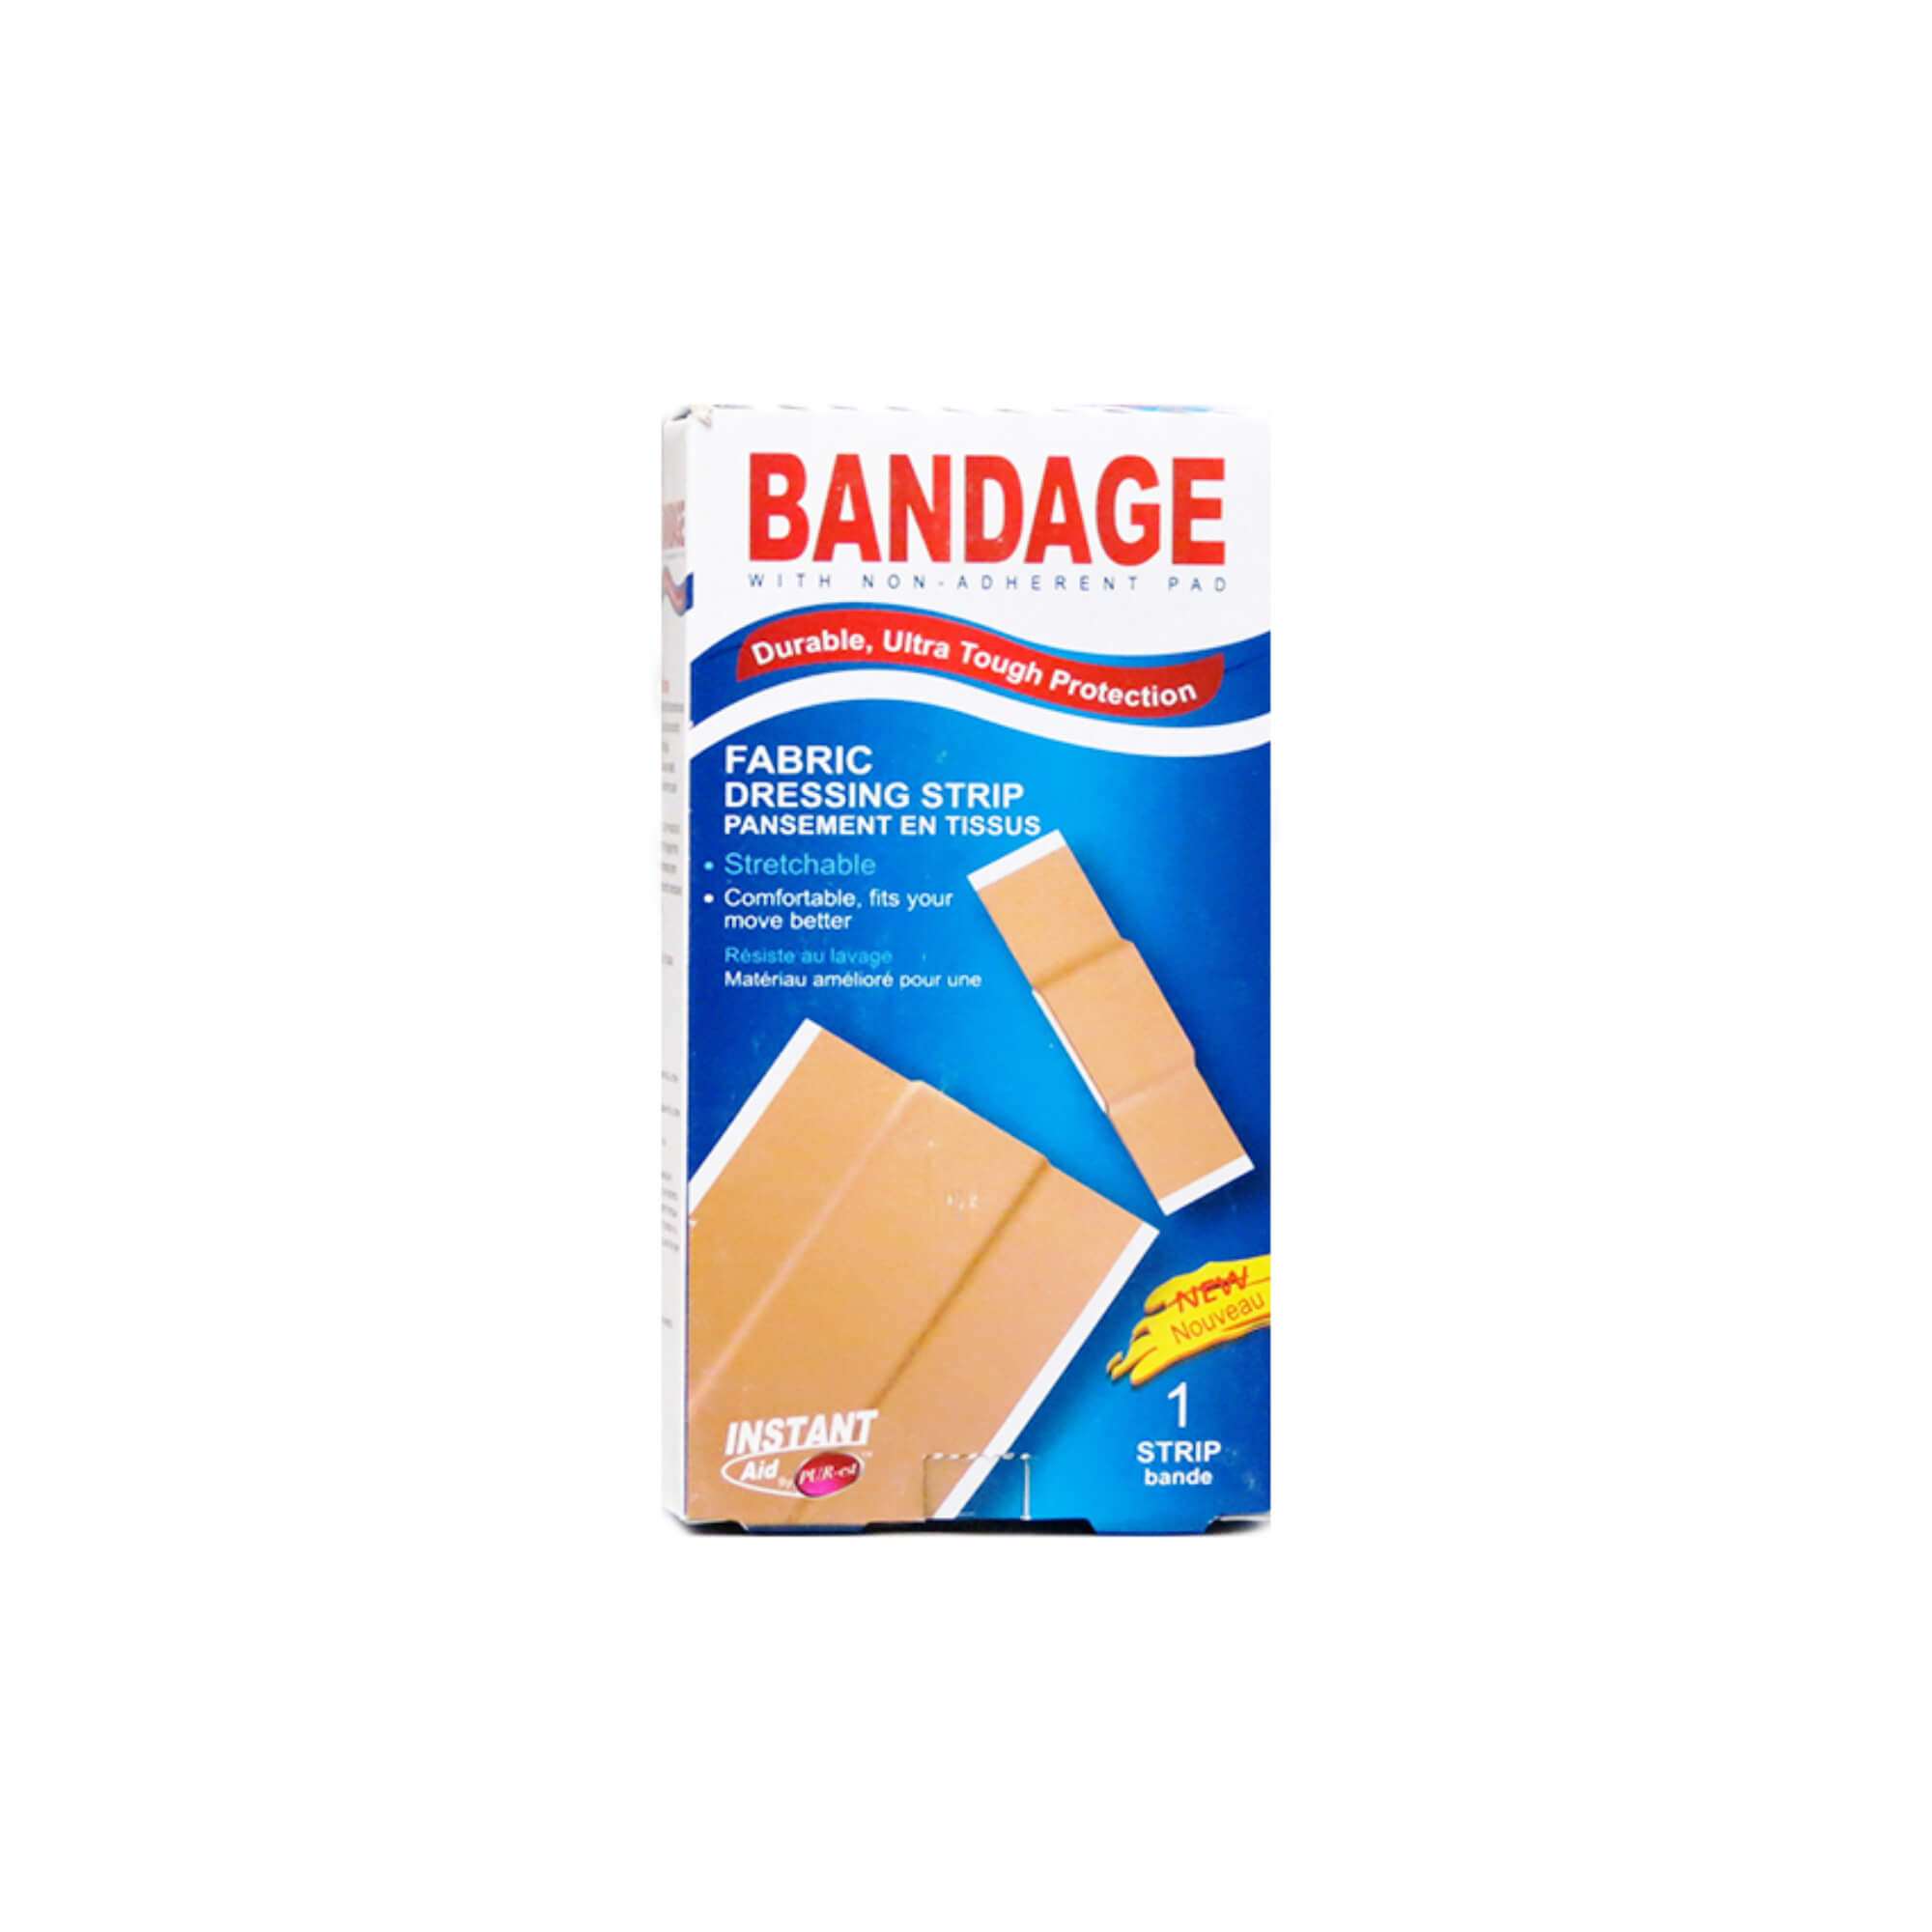 Instant Aid Bandage - Fabric Dressing Strip (Pack of 6)